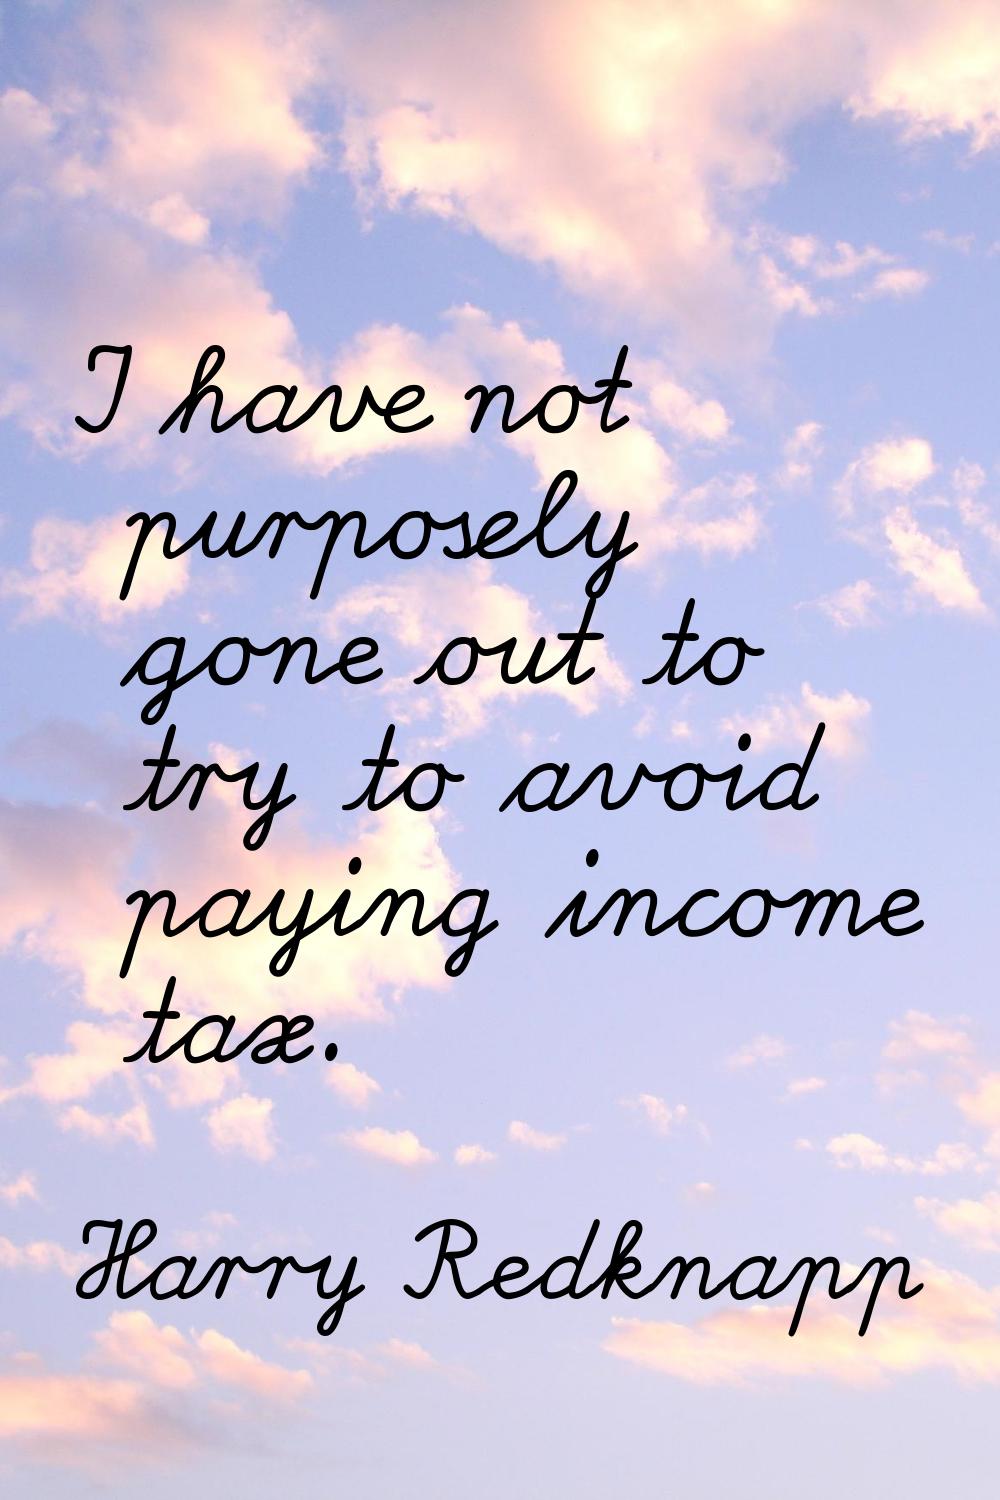 I have not purposely gone out to try to avoid paying income tax.